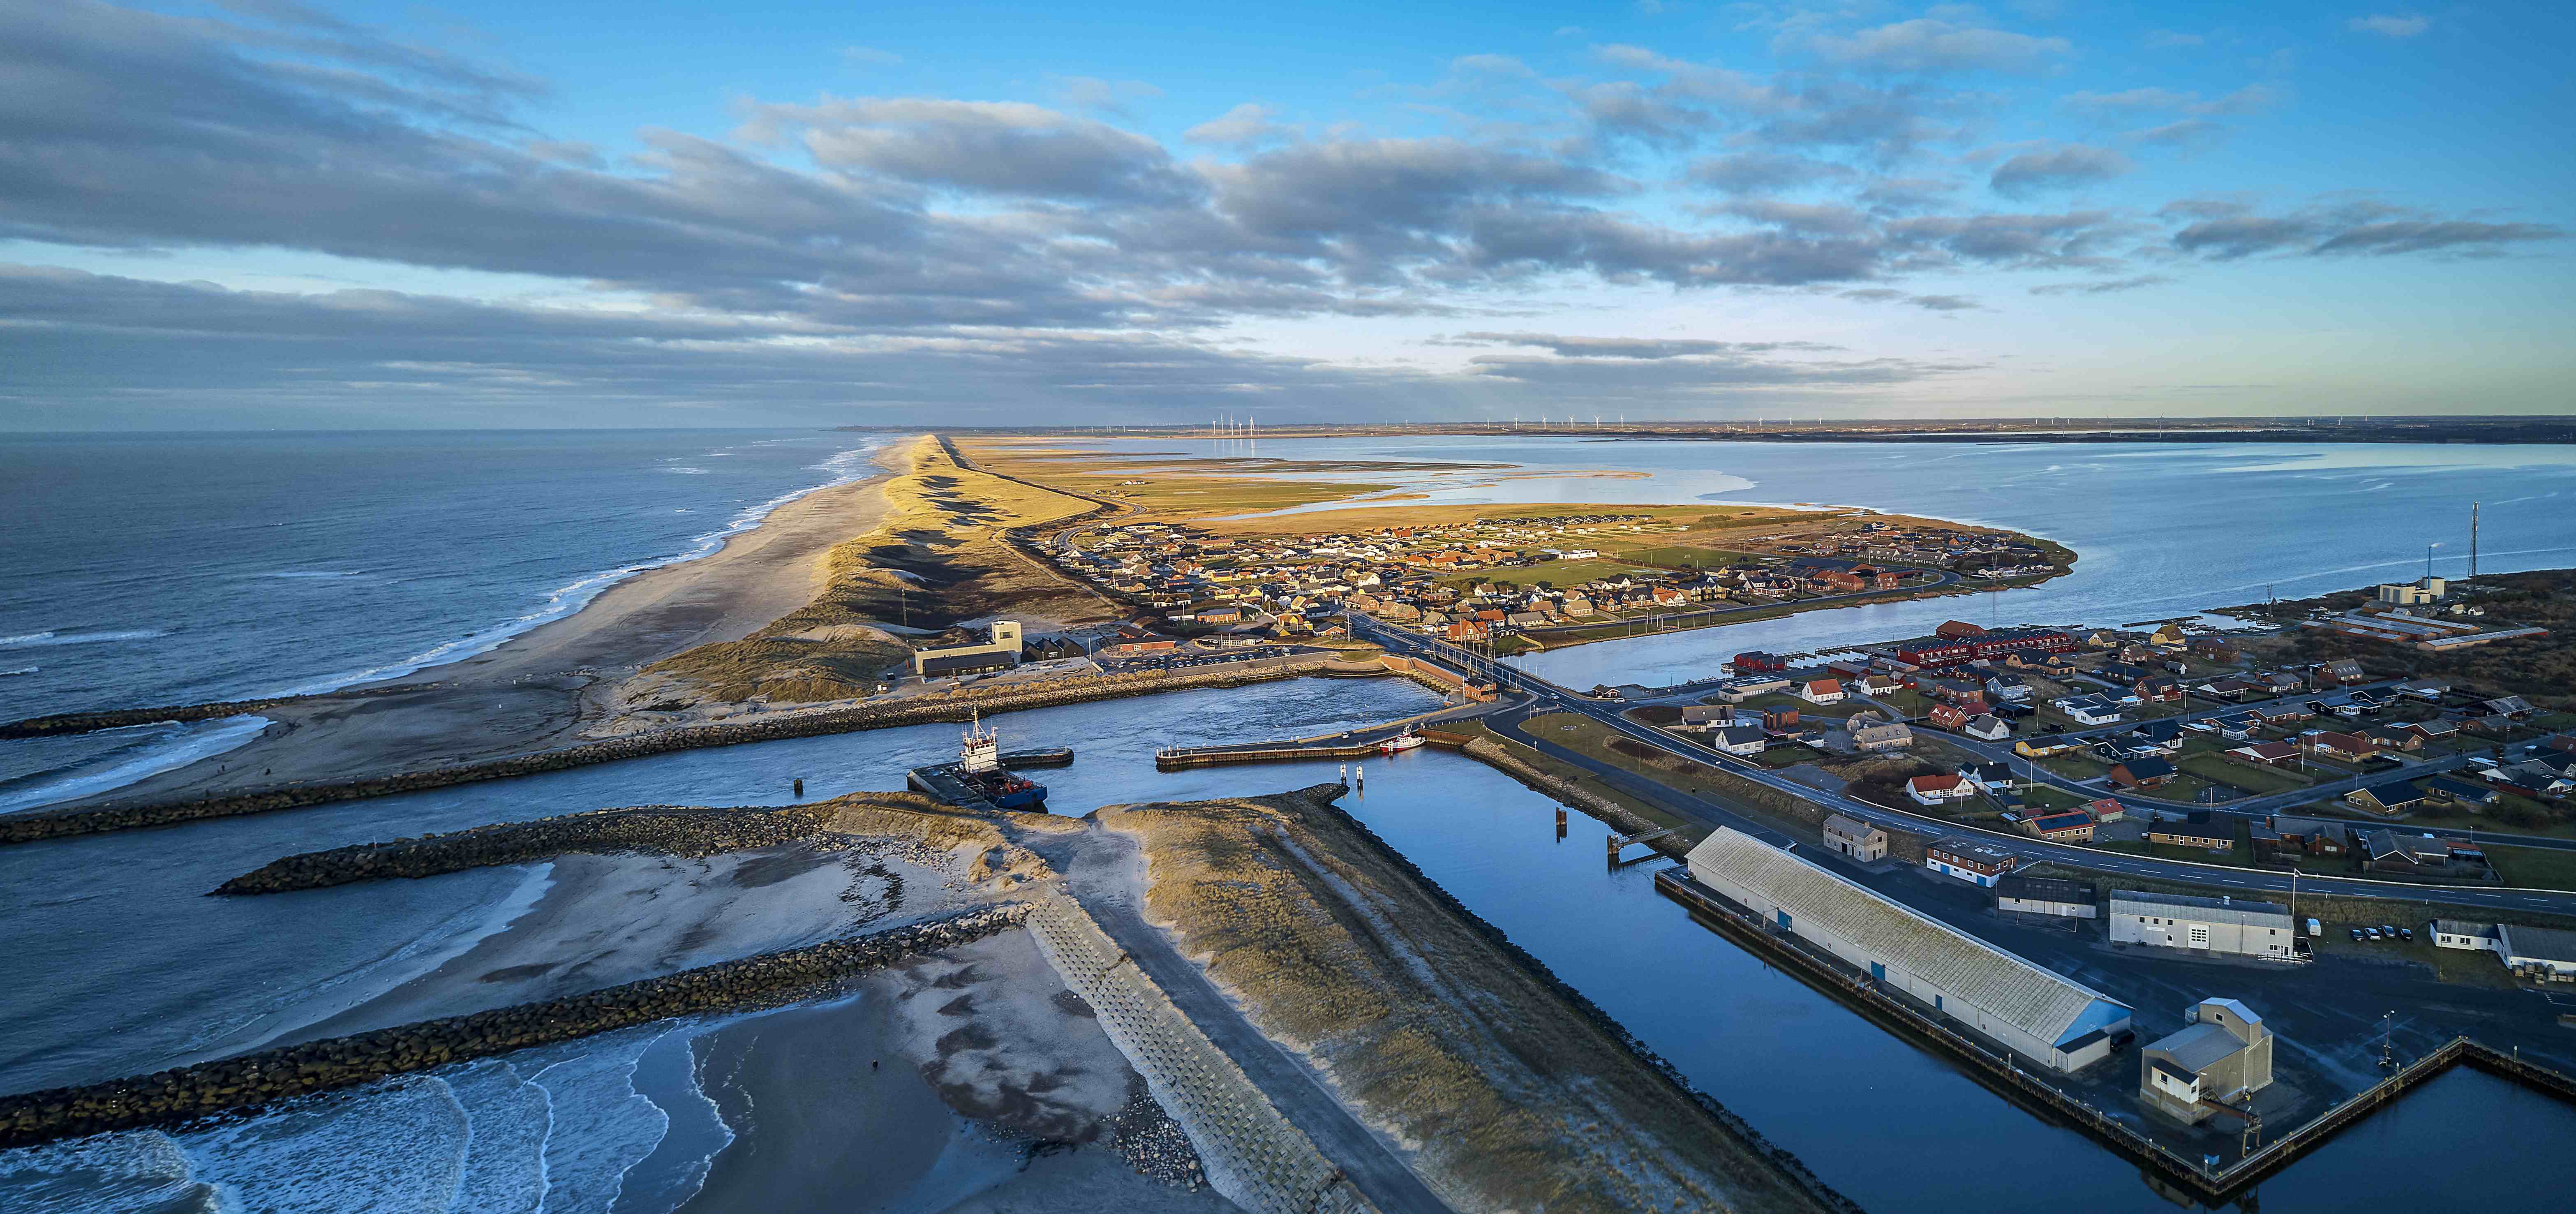 An aerial photo of the Port of Thorsminde